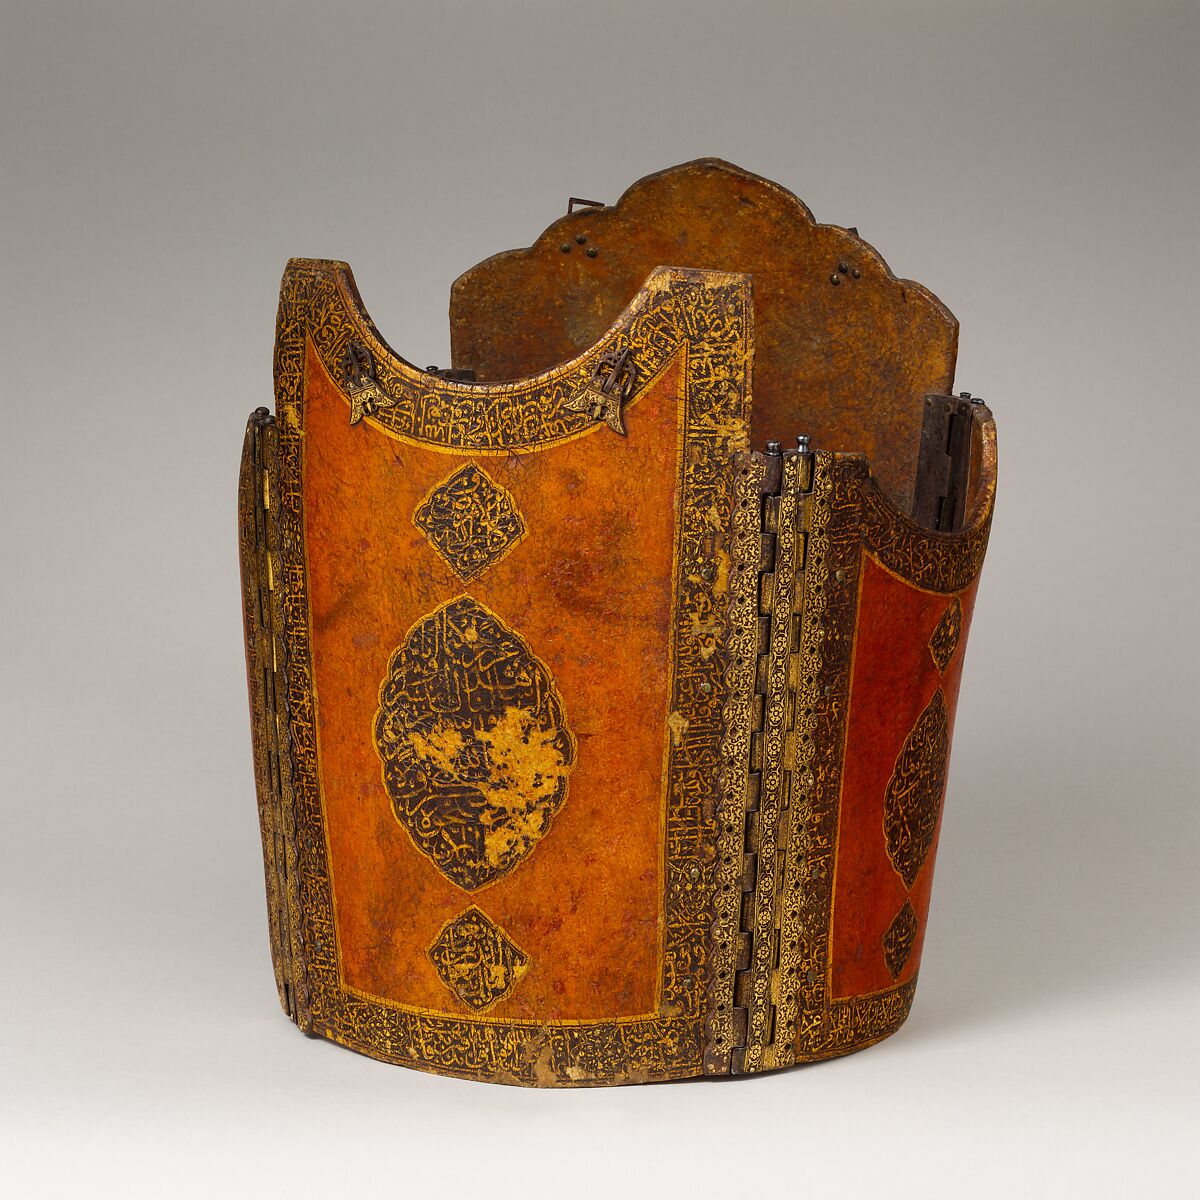 Cuirass, Leather, lacquer, pigment, iron, copper alloy, gold, Iranian 